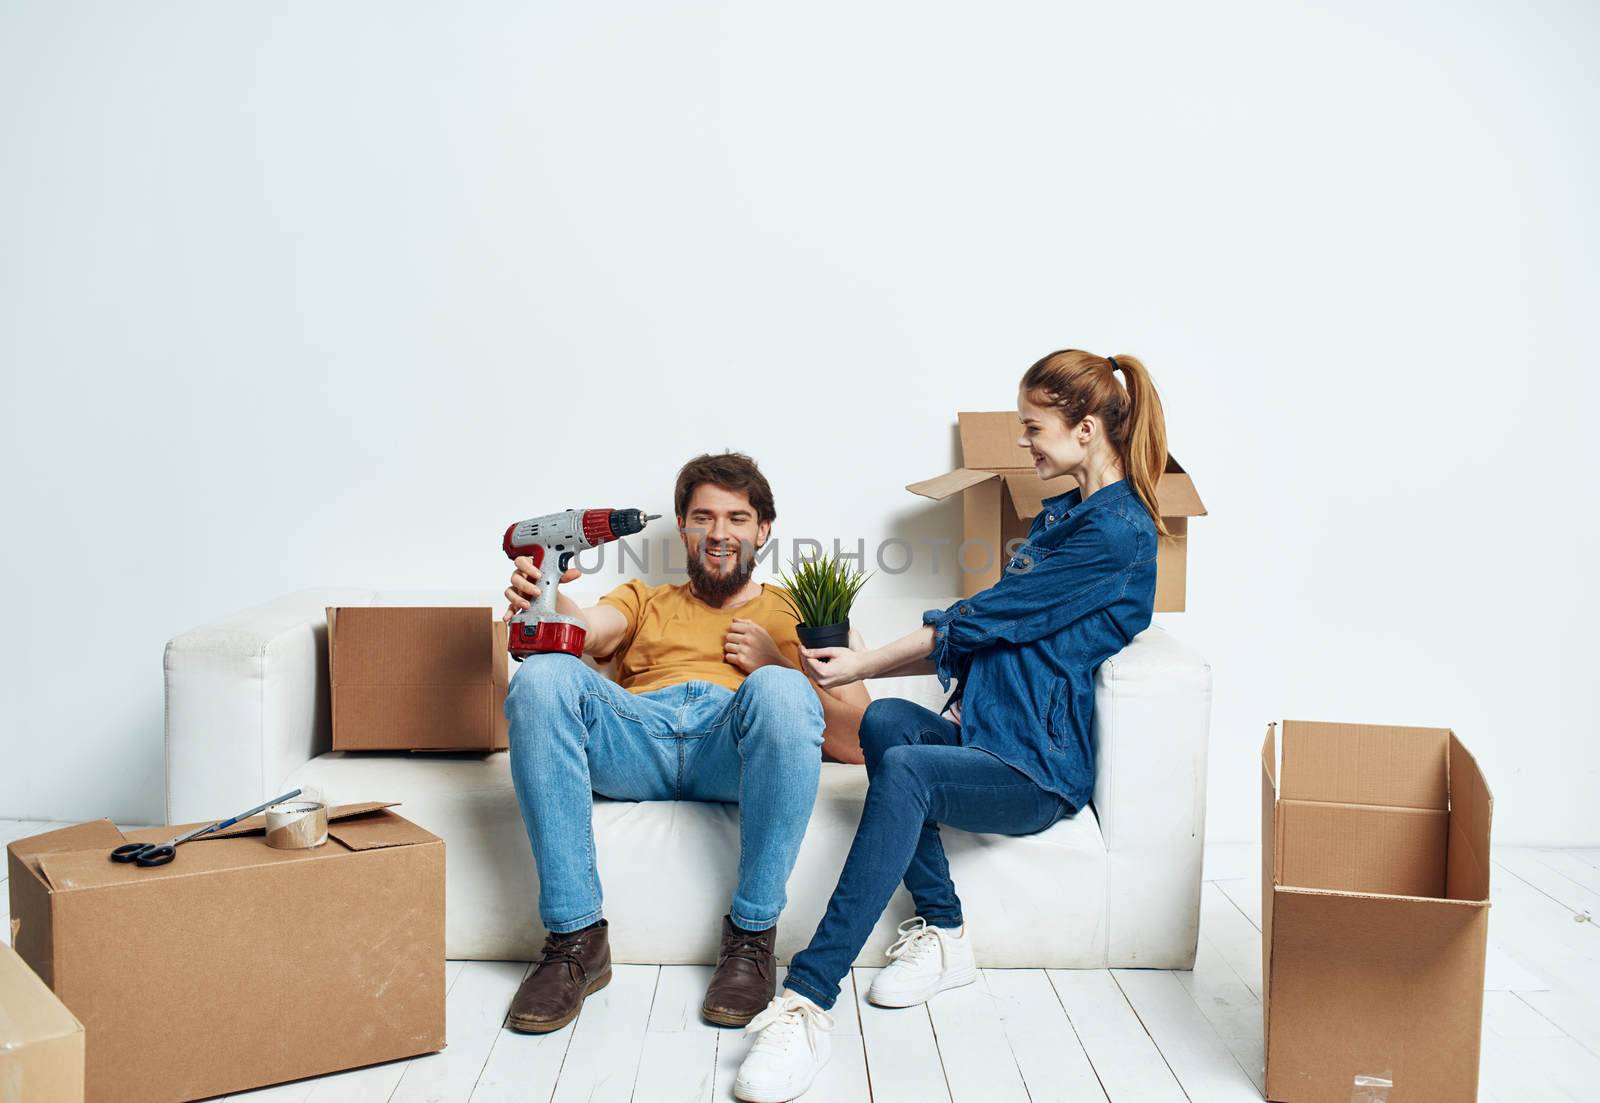 cheerful man and woman on the couch moving interior cardboard boxes by SHOTPRIME